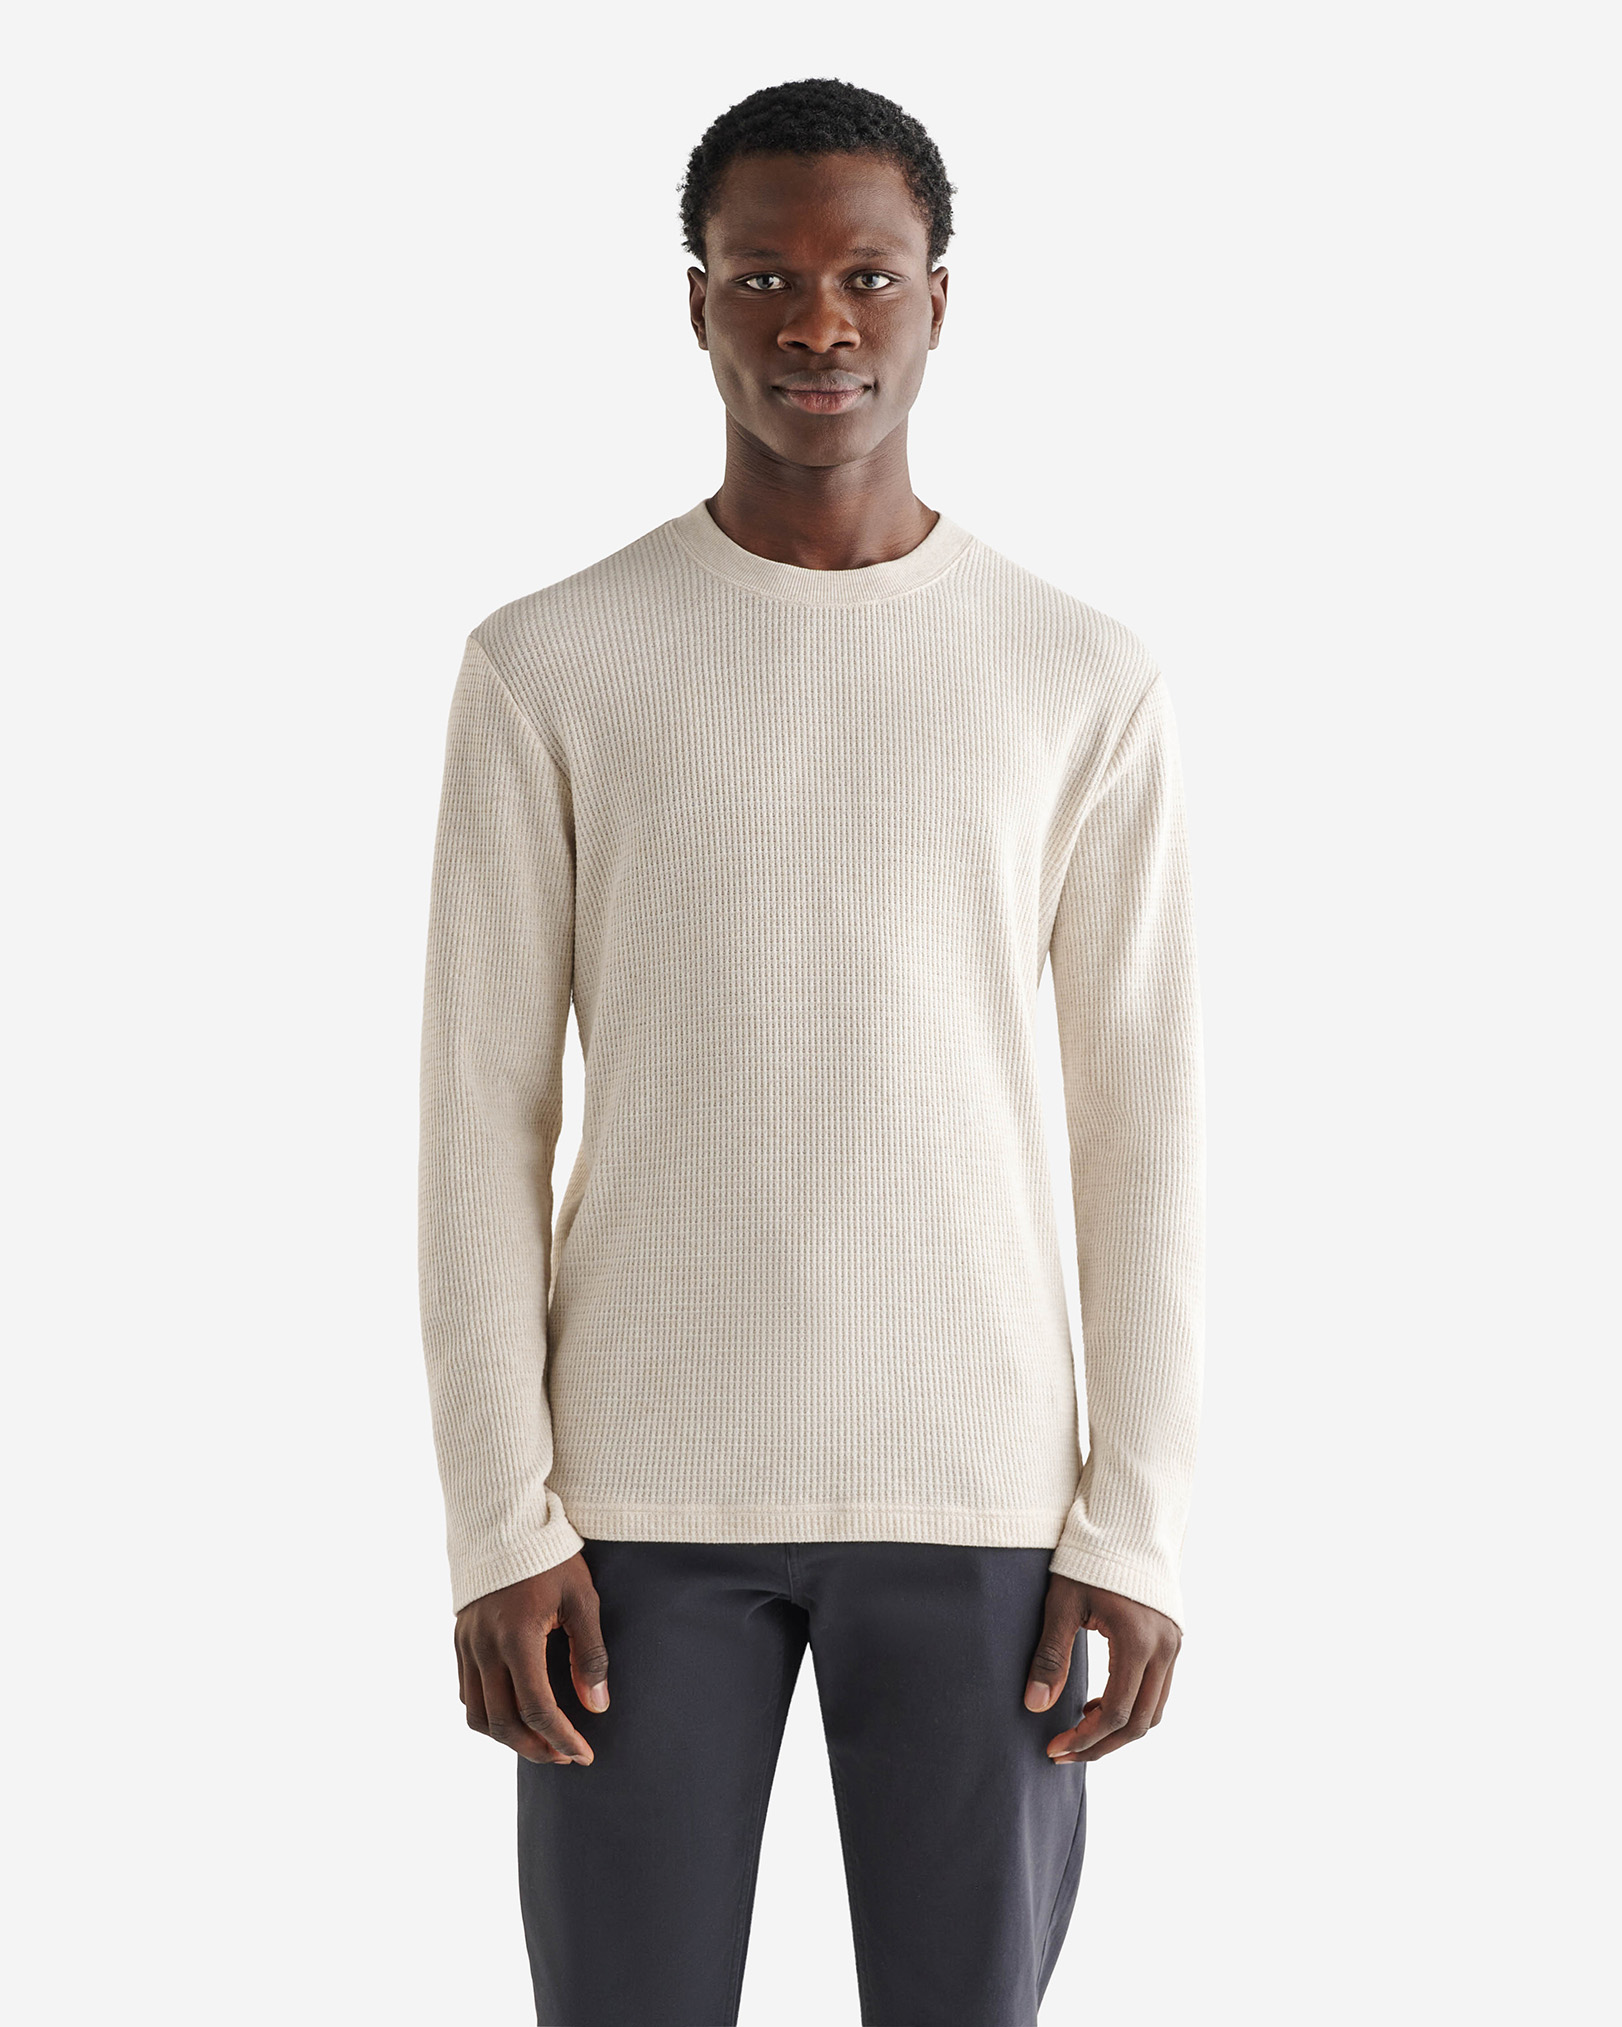 Roots Waffle Long Sleeve Crew Top in Oatmeal Mix